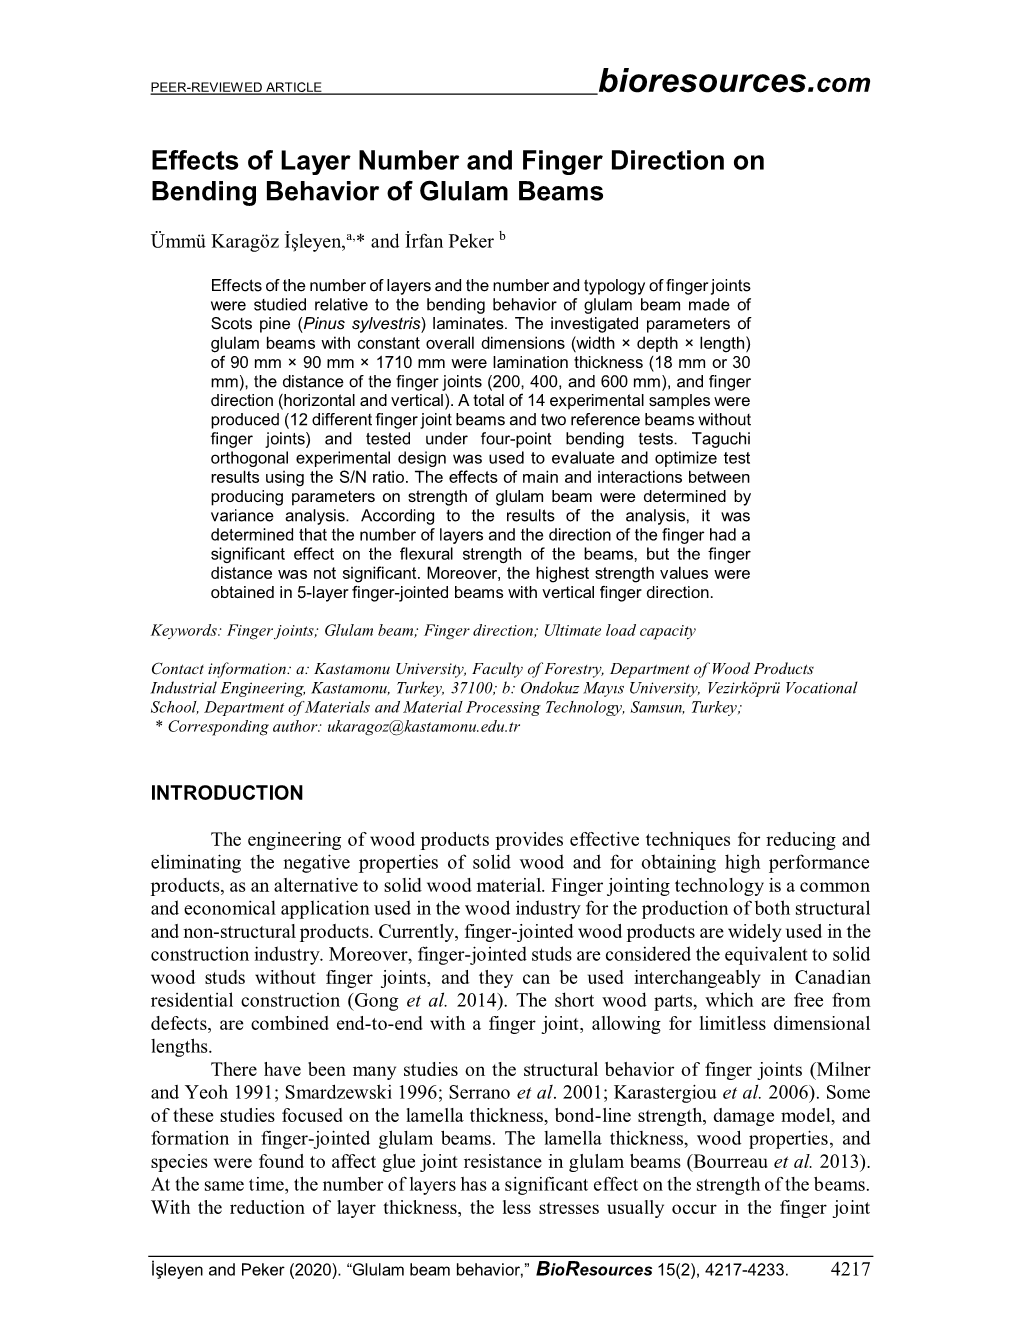 Effects of Layer Number and Finger Direction on Bending Behavior of Glulam Beams